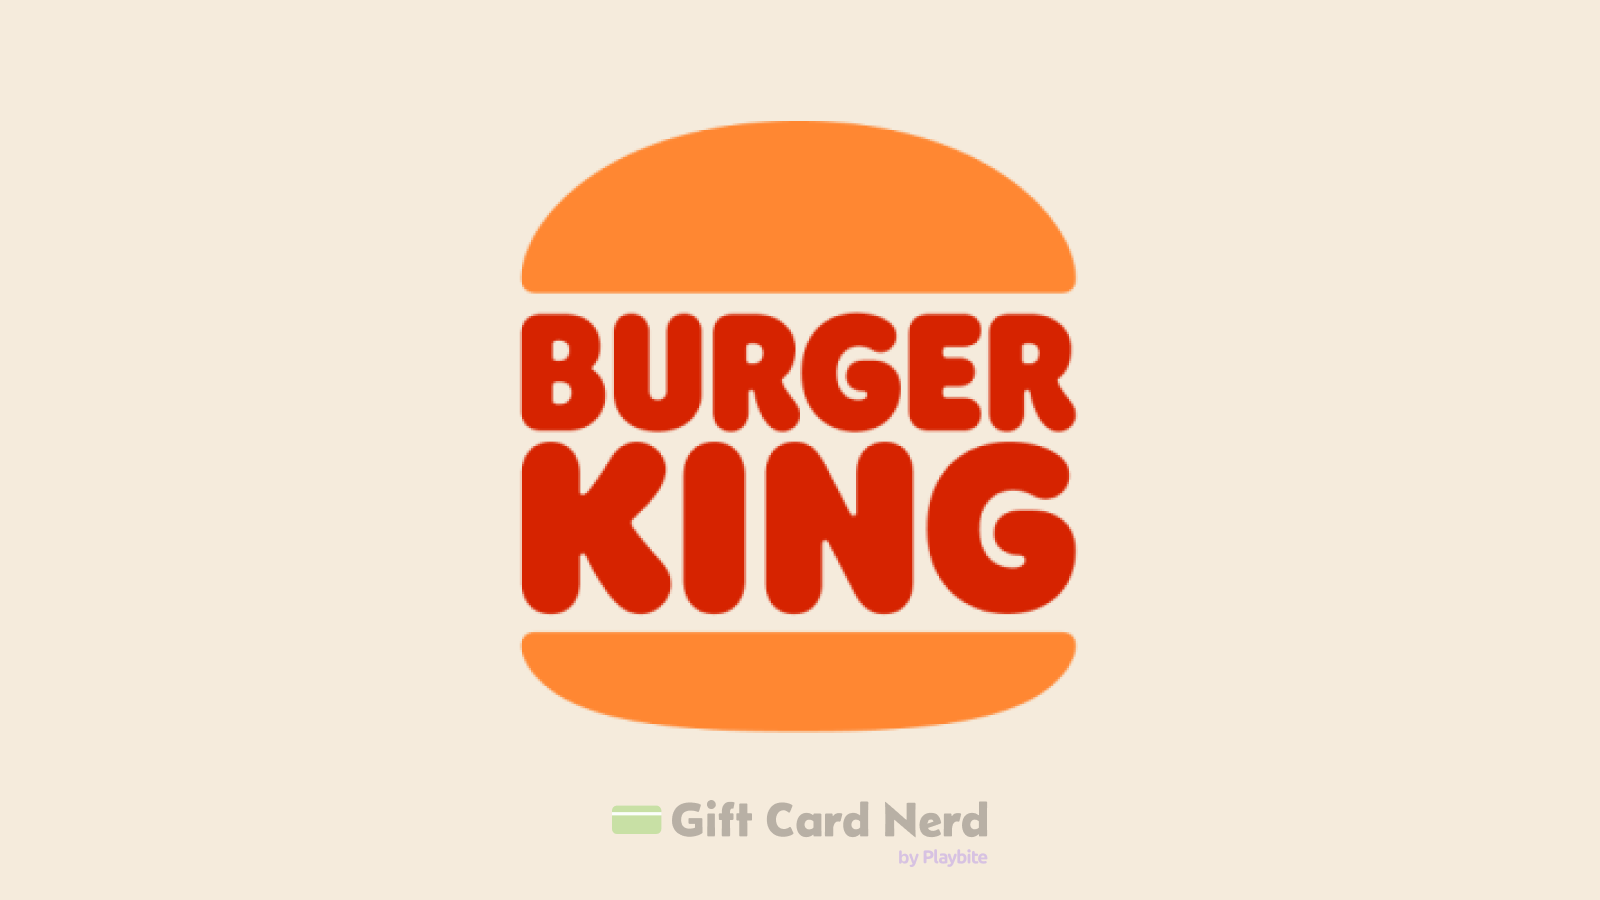 Can I Use a Burger King Gift Card on Paypal?